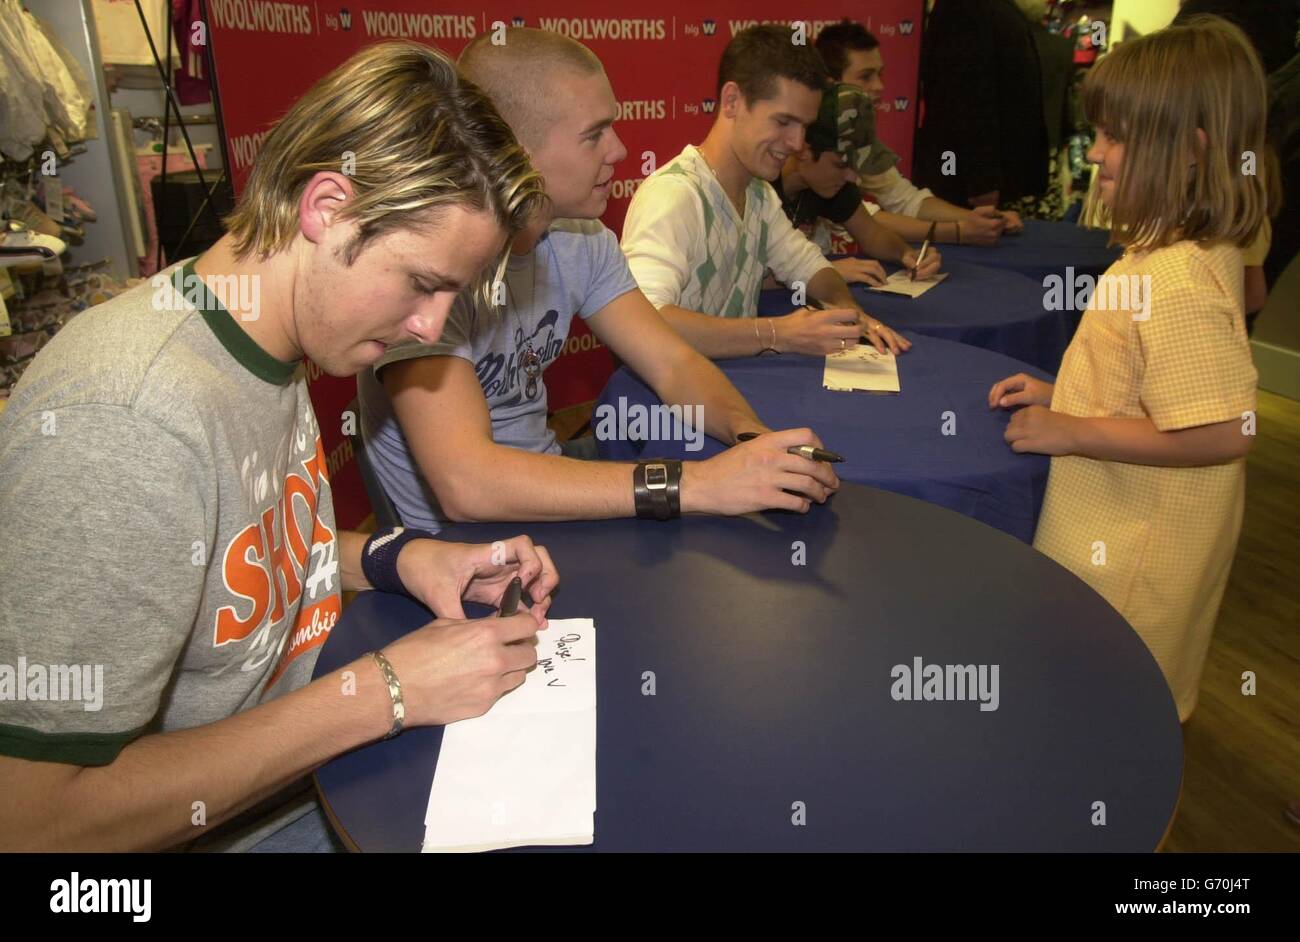 New boy band 'V' at a signing at Woolworths, Staines to launch their first single. Stock Photo